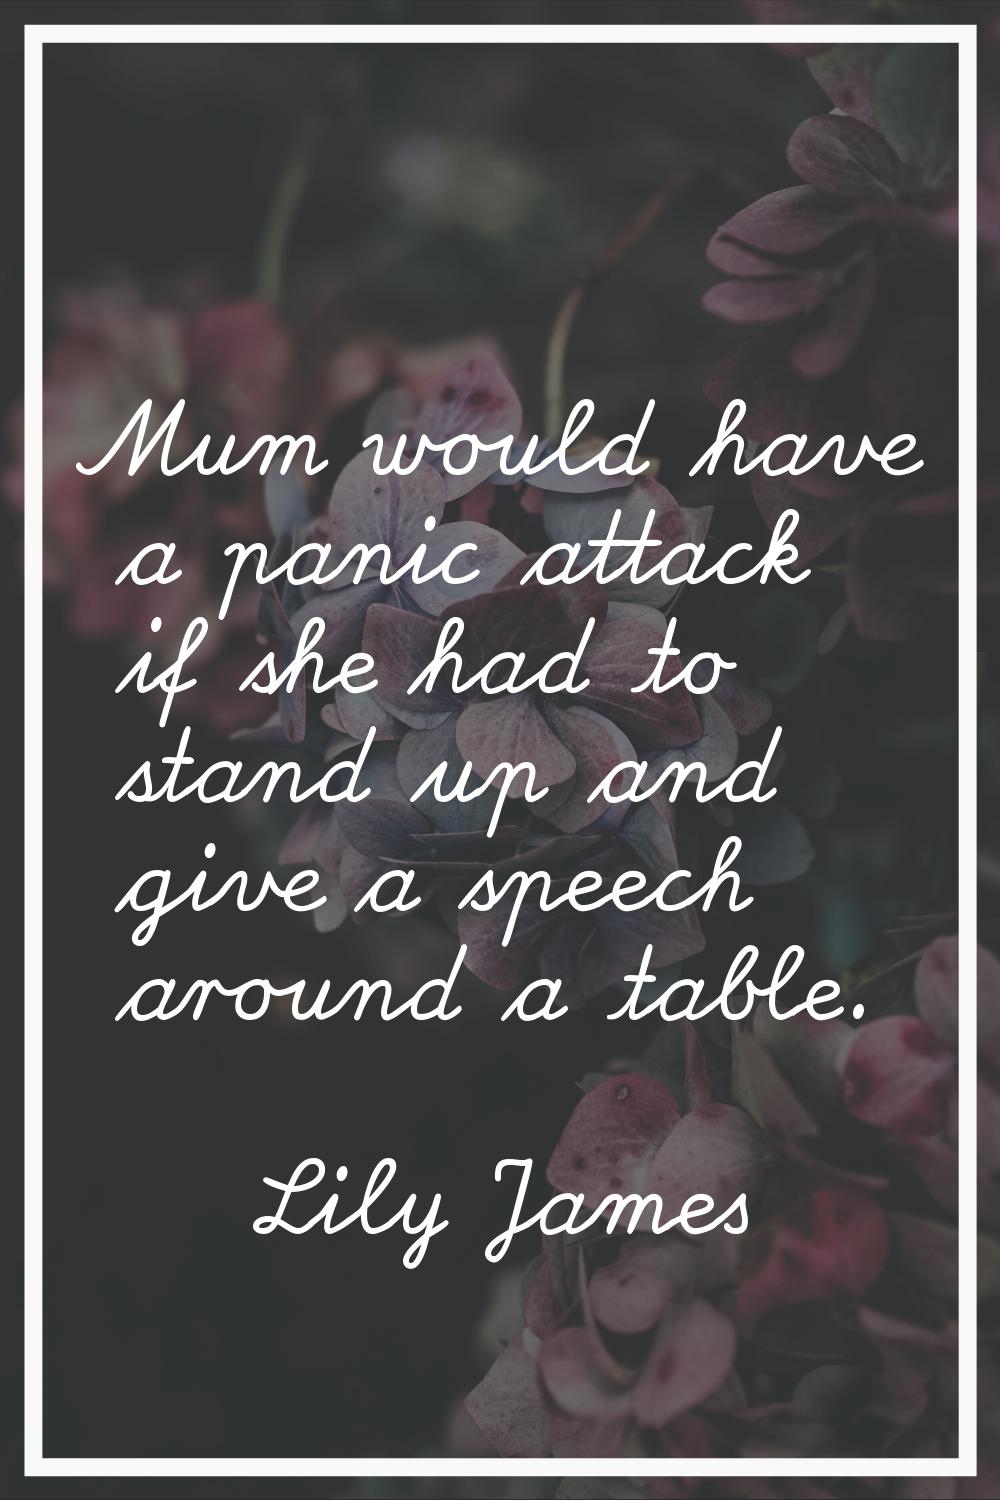 Mum would have a panic attack if she had to stand up and give a speech around a table.